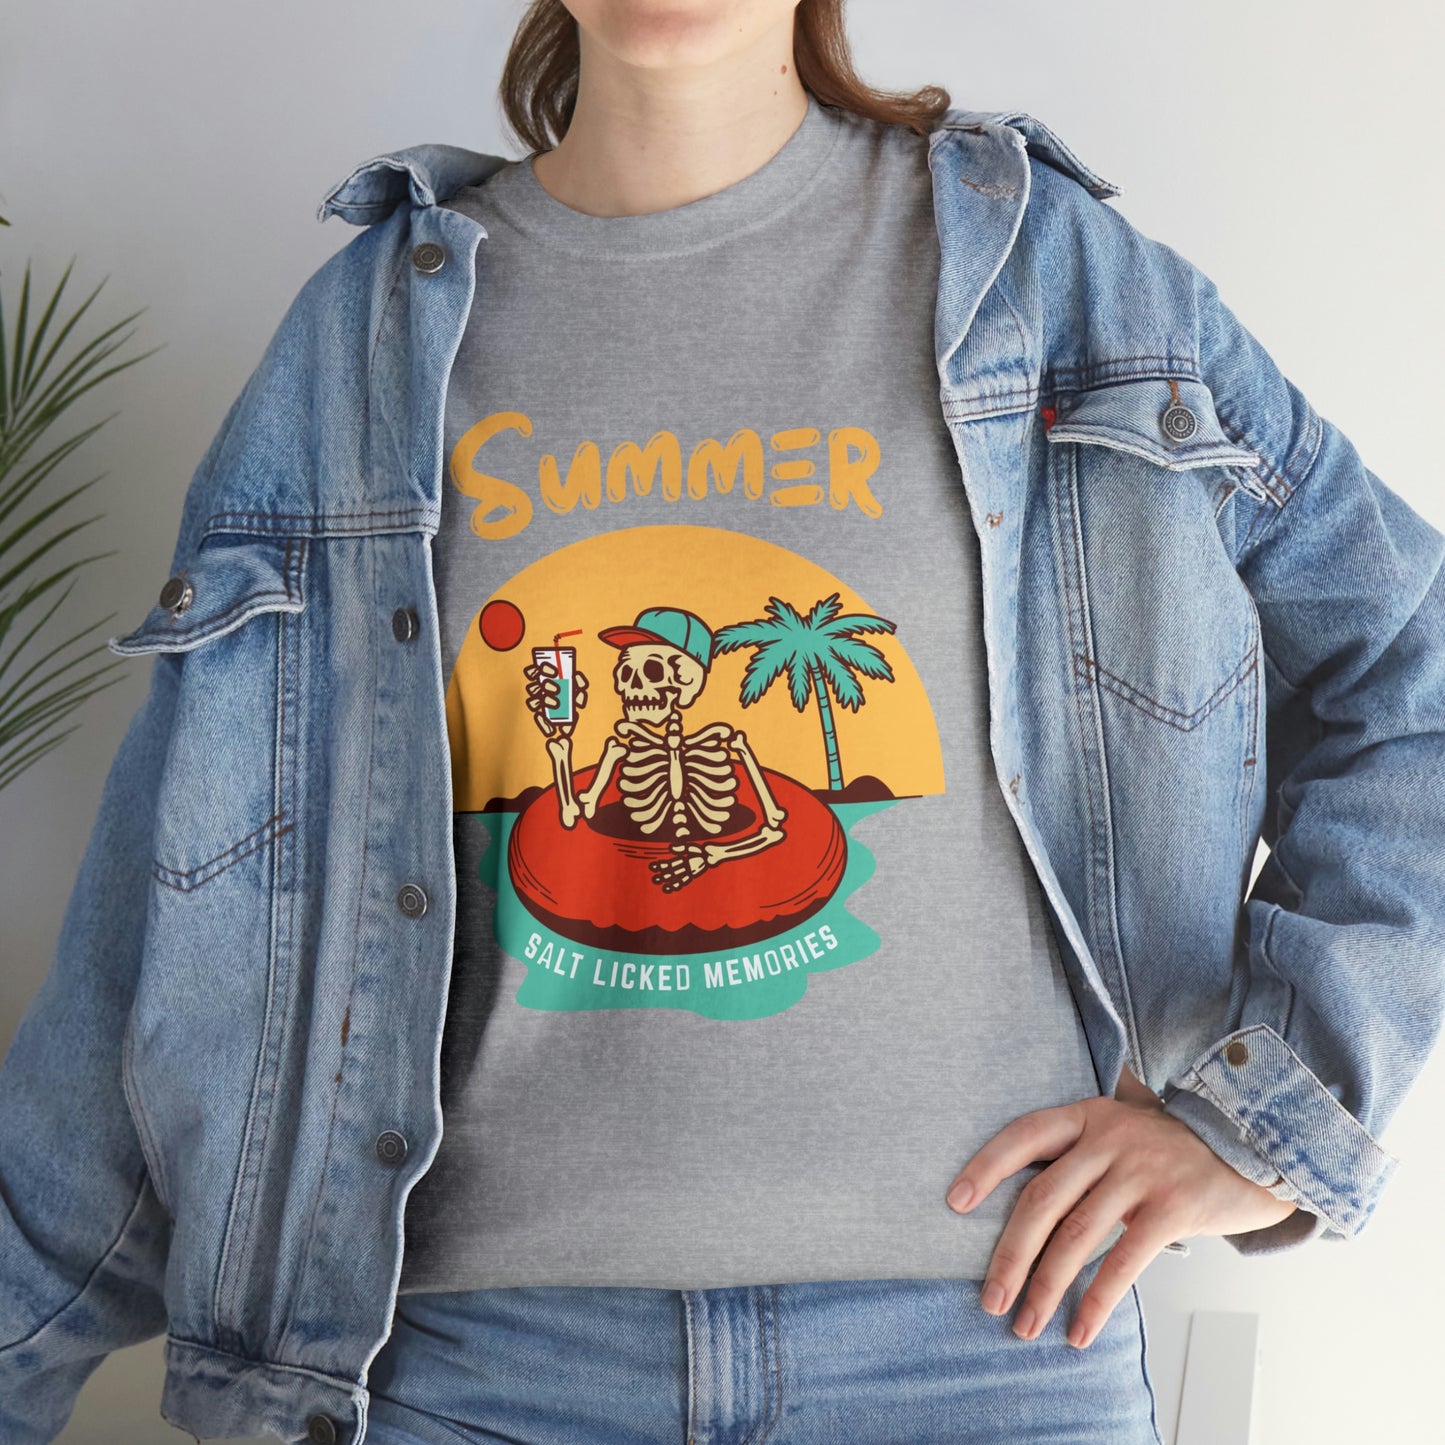 Summer Your Style Our Custom Printed Tee Unique Design Comfortable Fit Personalized for You color, funny tshirt tee shirt motivation